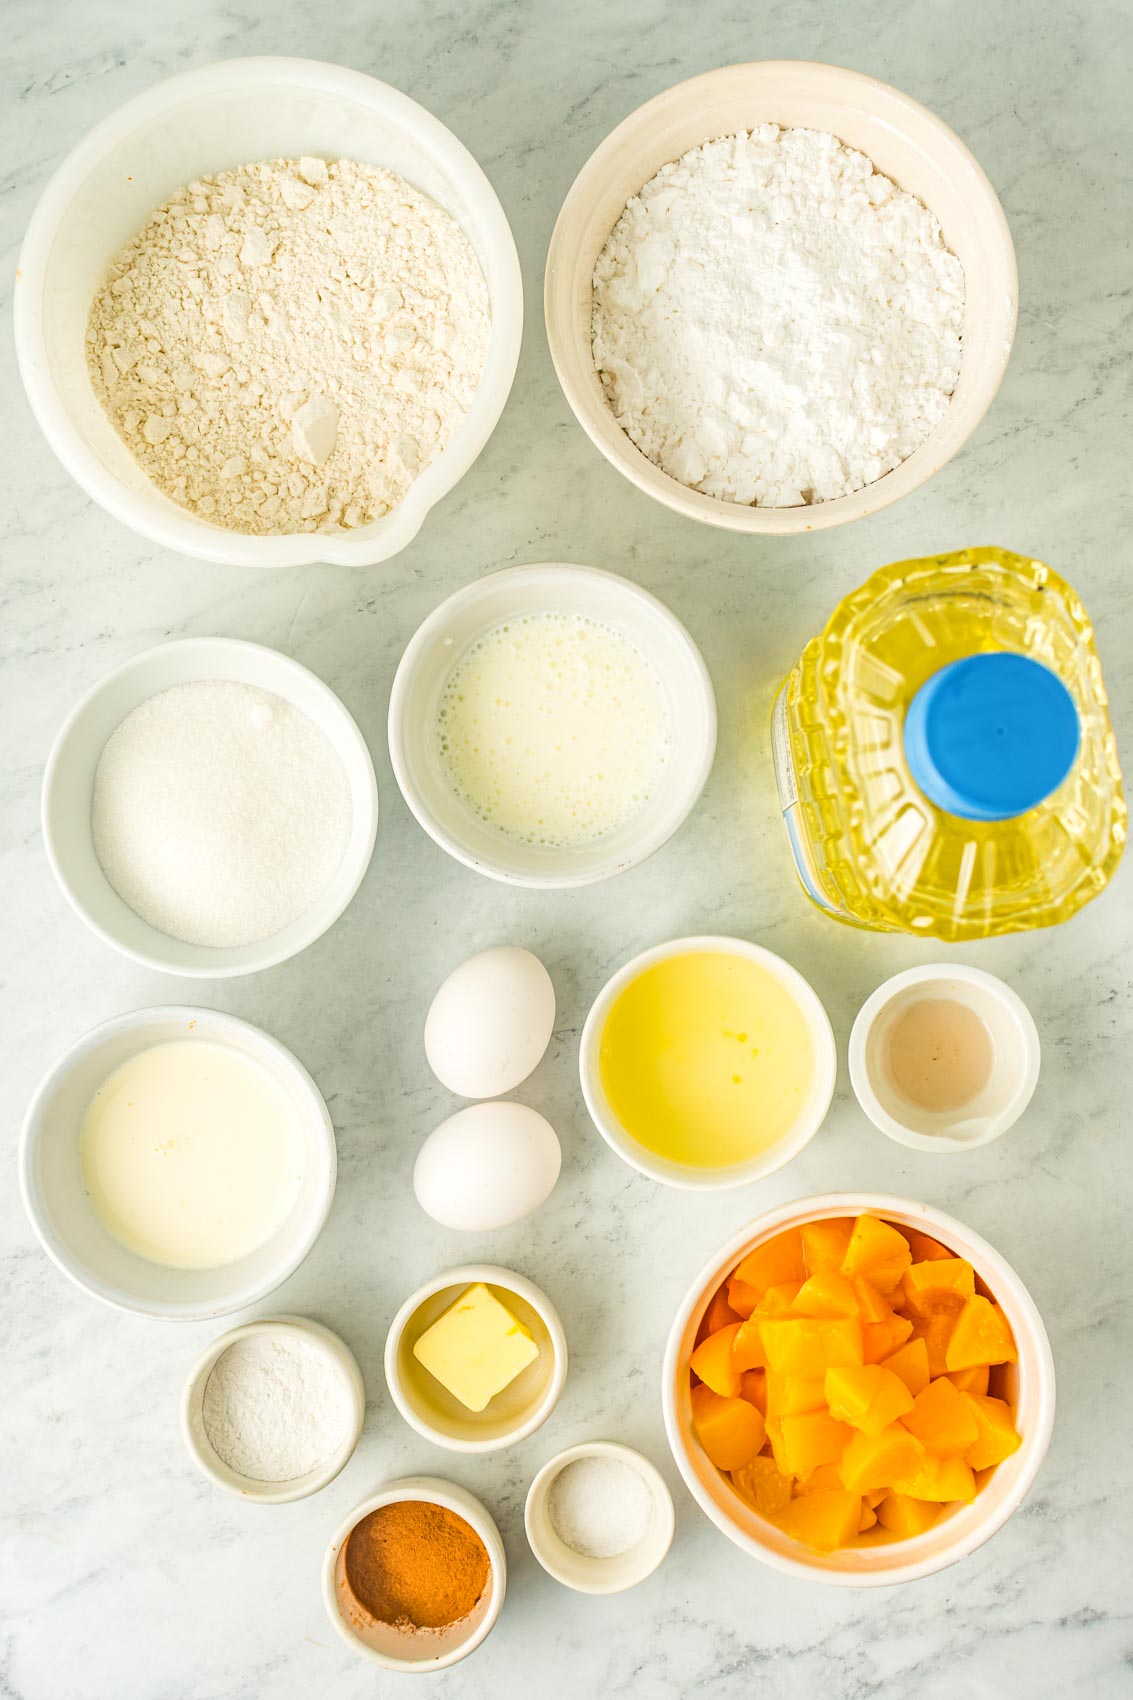 ingredients for peach fritters, including flour, canola oil, canned peaches, vanilla, eggs, milk, cinnamon, sugar and butter